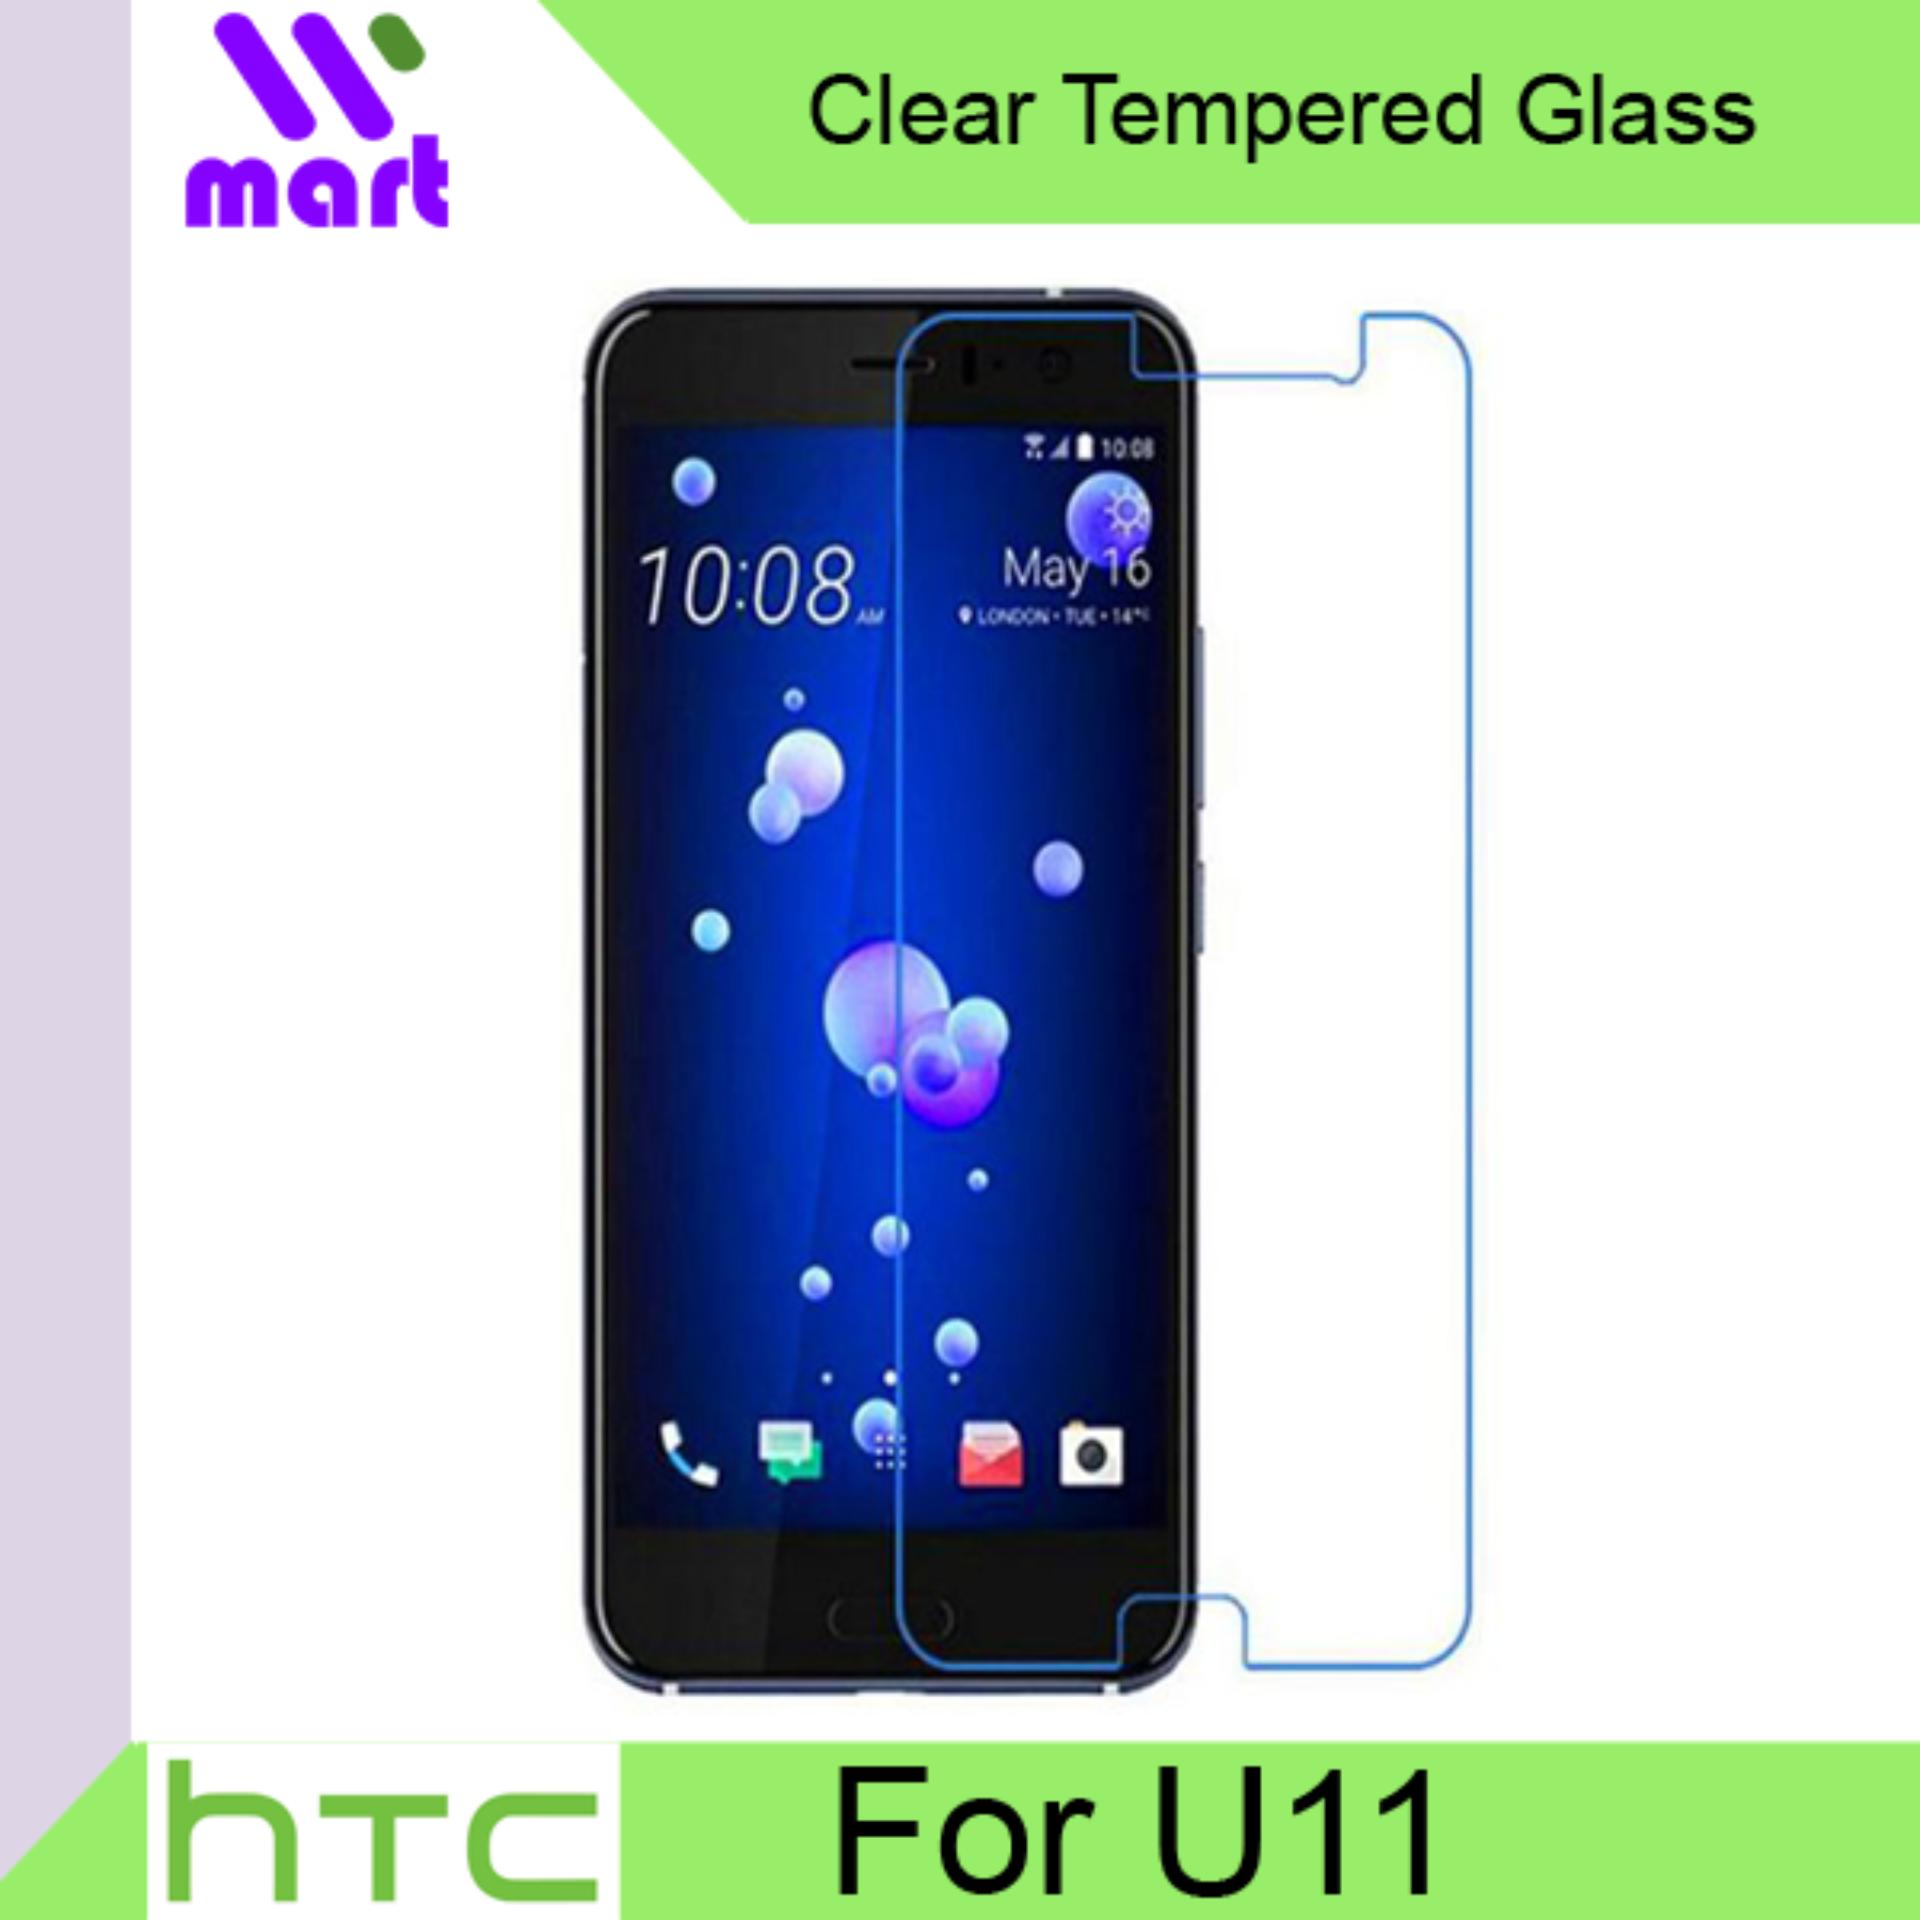 Tempered Glass Screen Protector (Clear) For HTC U11